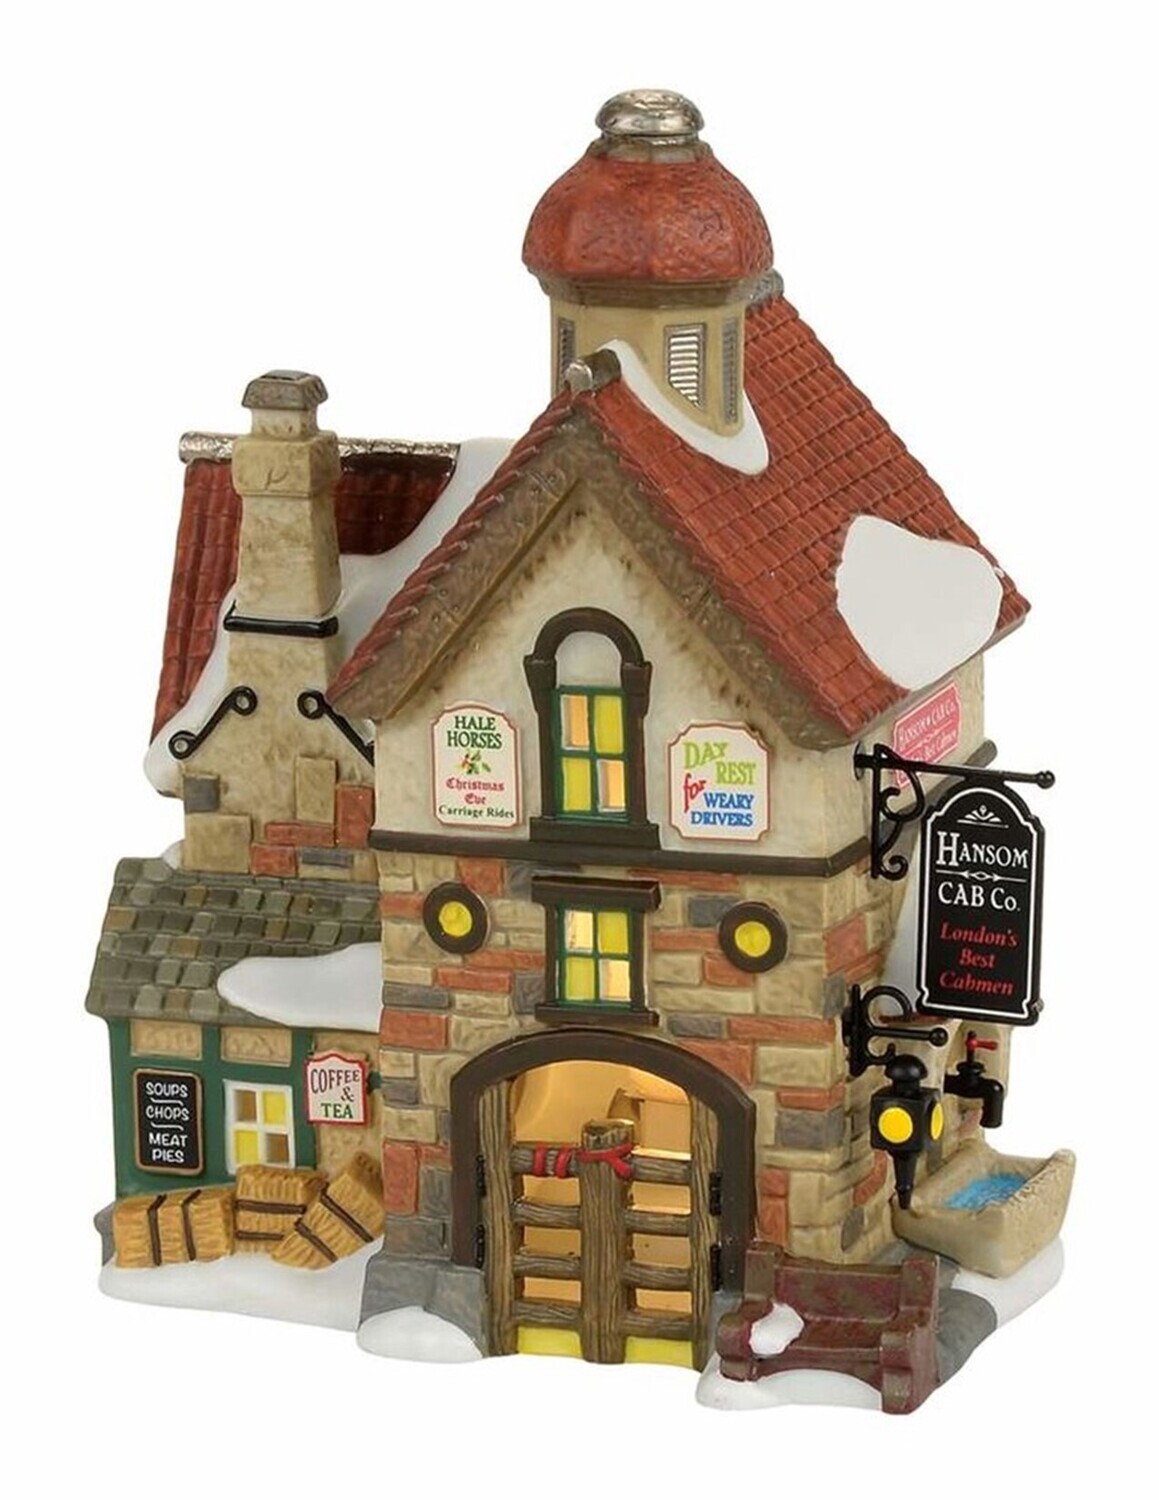 Department 56 Dickens Village "The Hansom Cab Co" Building (4056644)